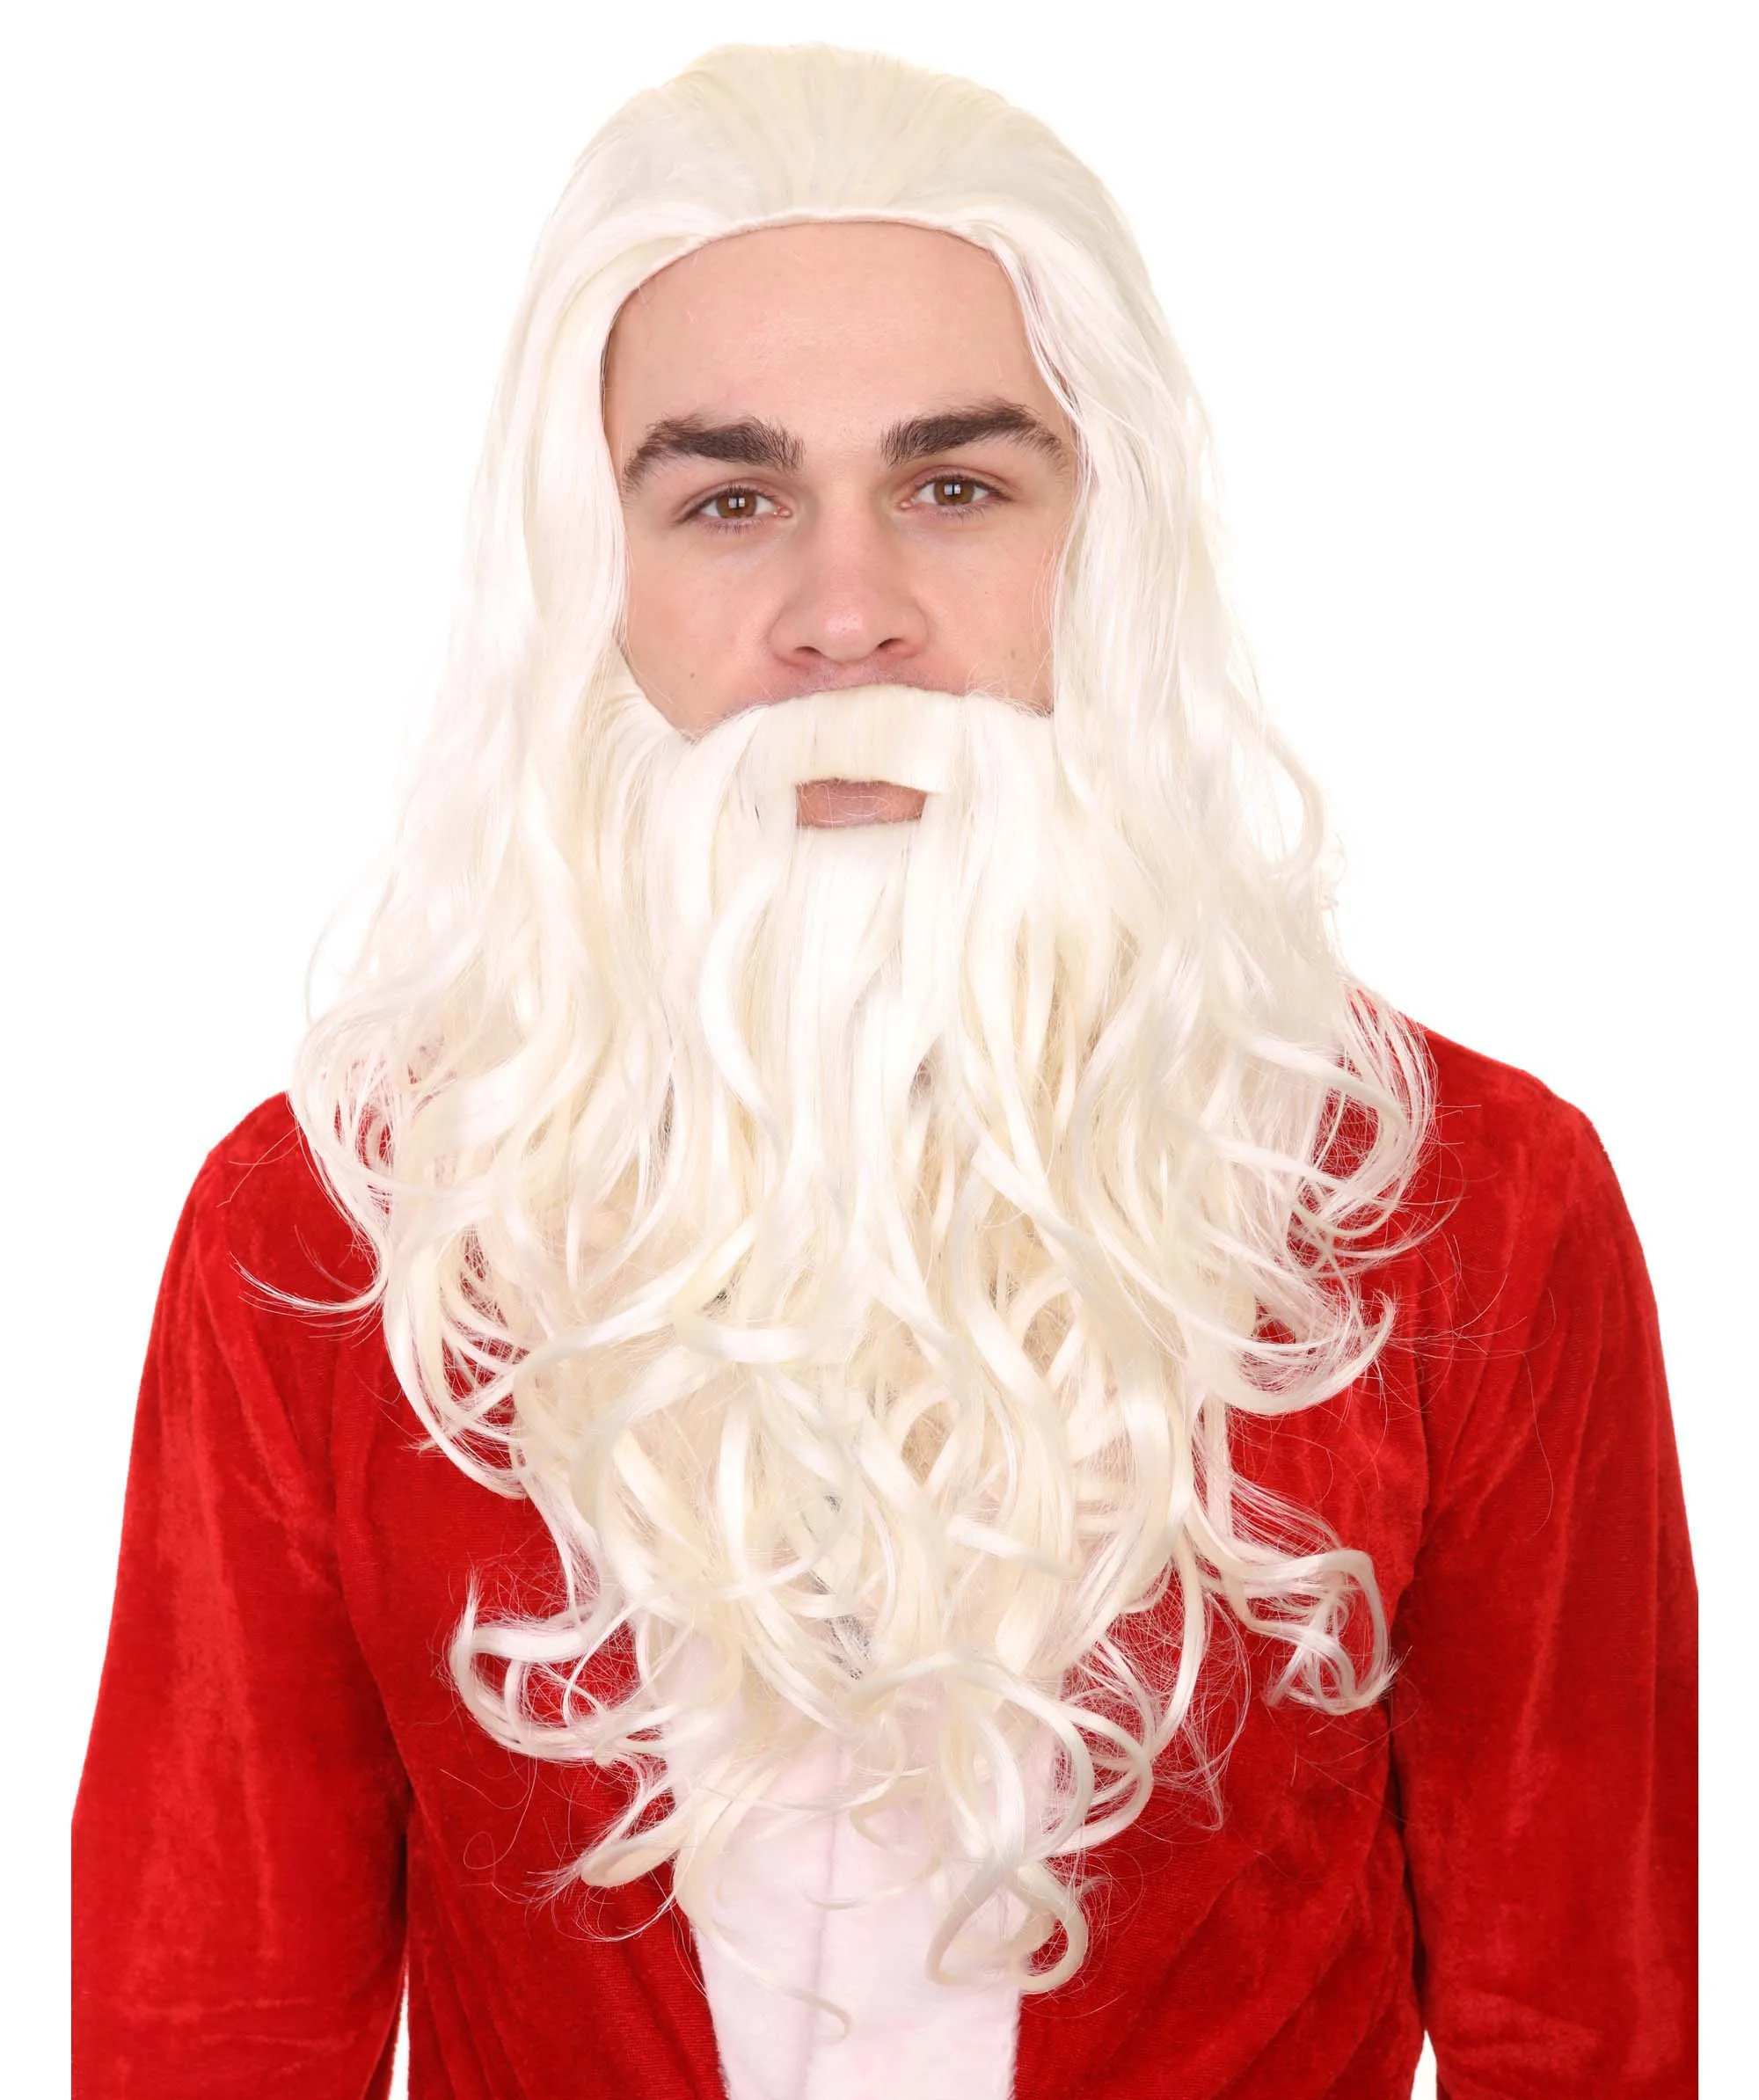 HPO White Grey Blonde Costumes Makeup Adult Xmas Party Cosplay Claus Curly Wig and Beard Set Super Santa Adul Fancy Holidays Wig